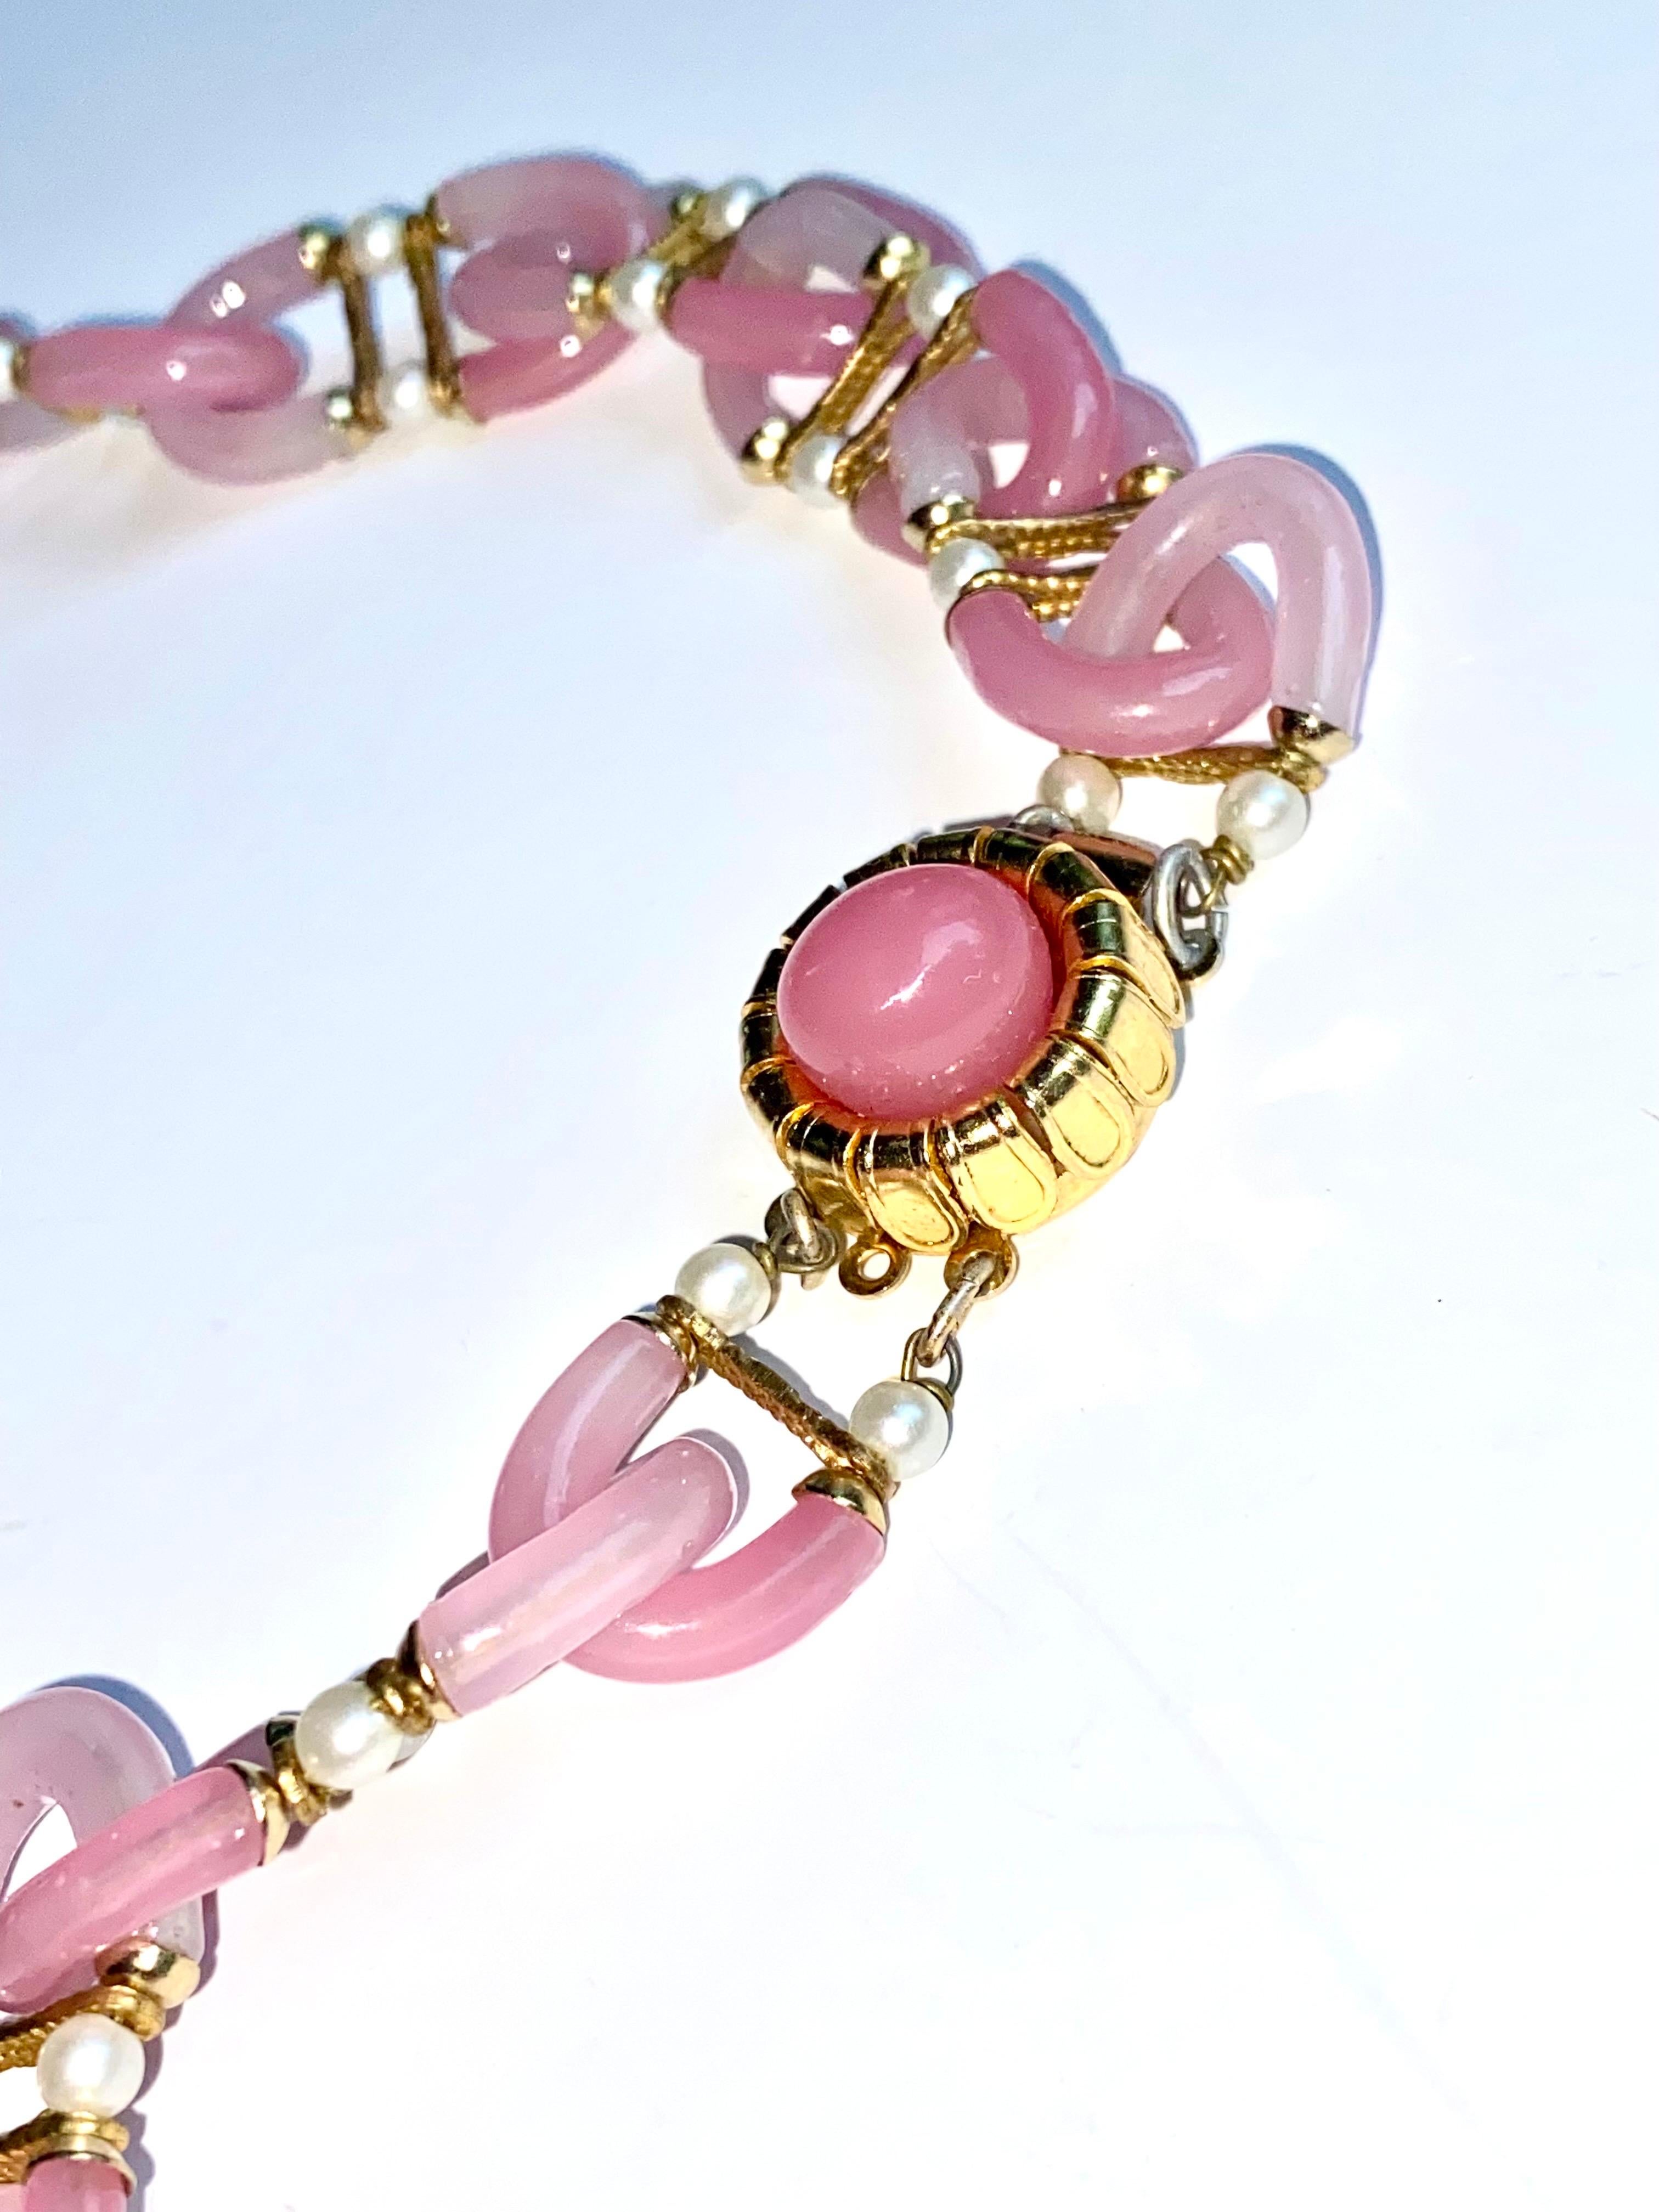 Archimede Seguso, Vetri d'Arte, for Chanel Rose Pink Glass Chain Necklace, 1960s 13